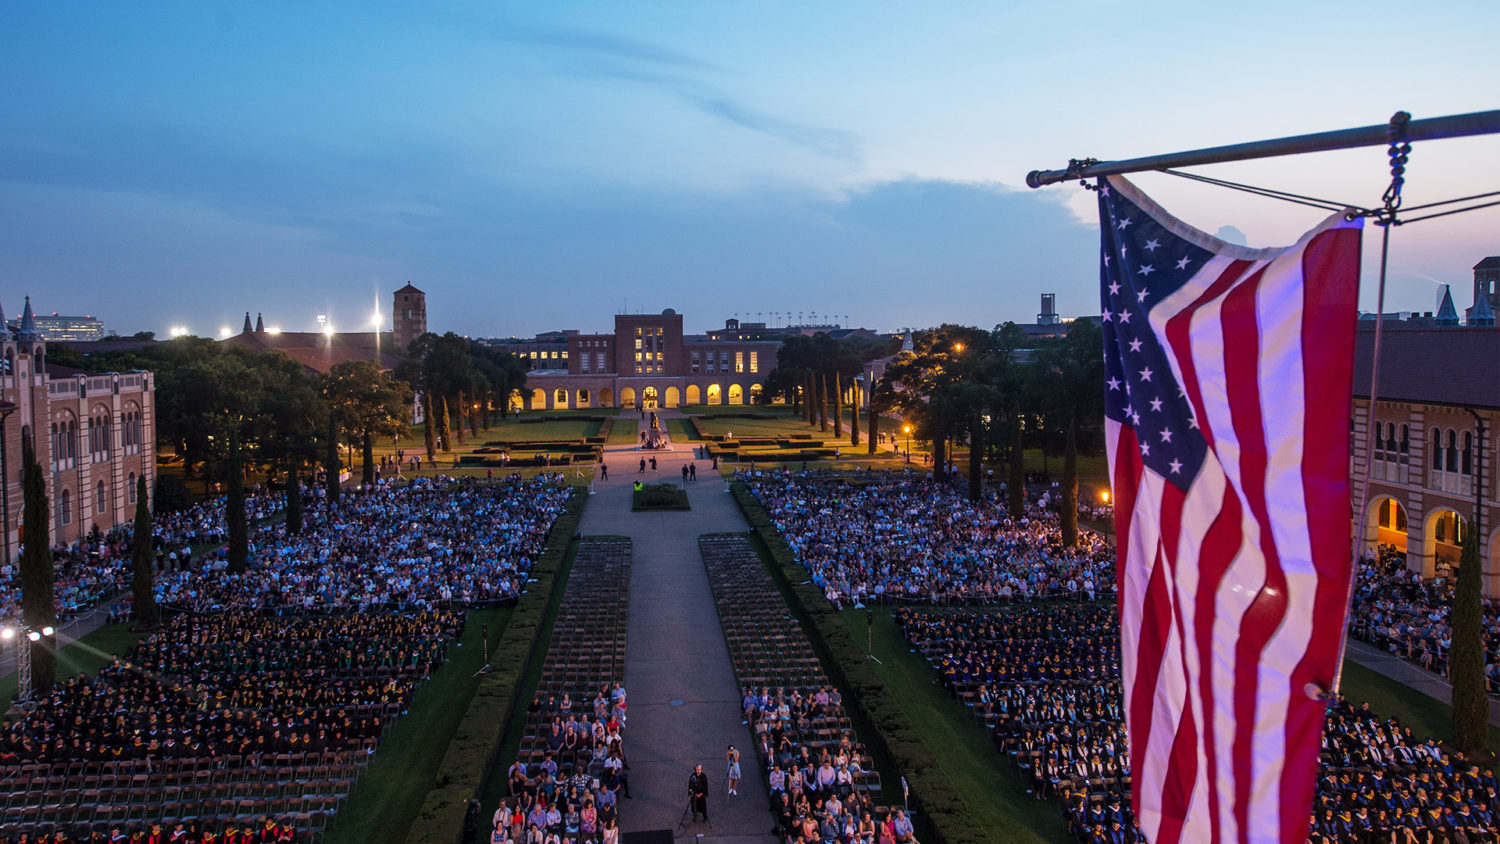 Rice campus at night during commencement